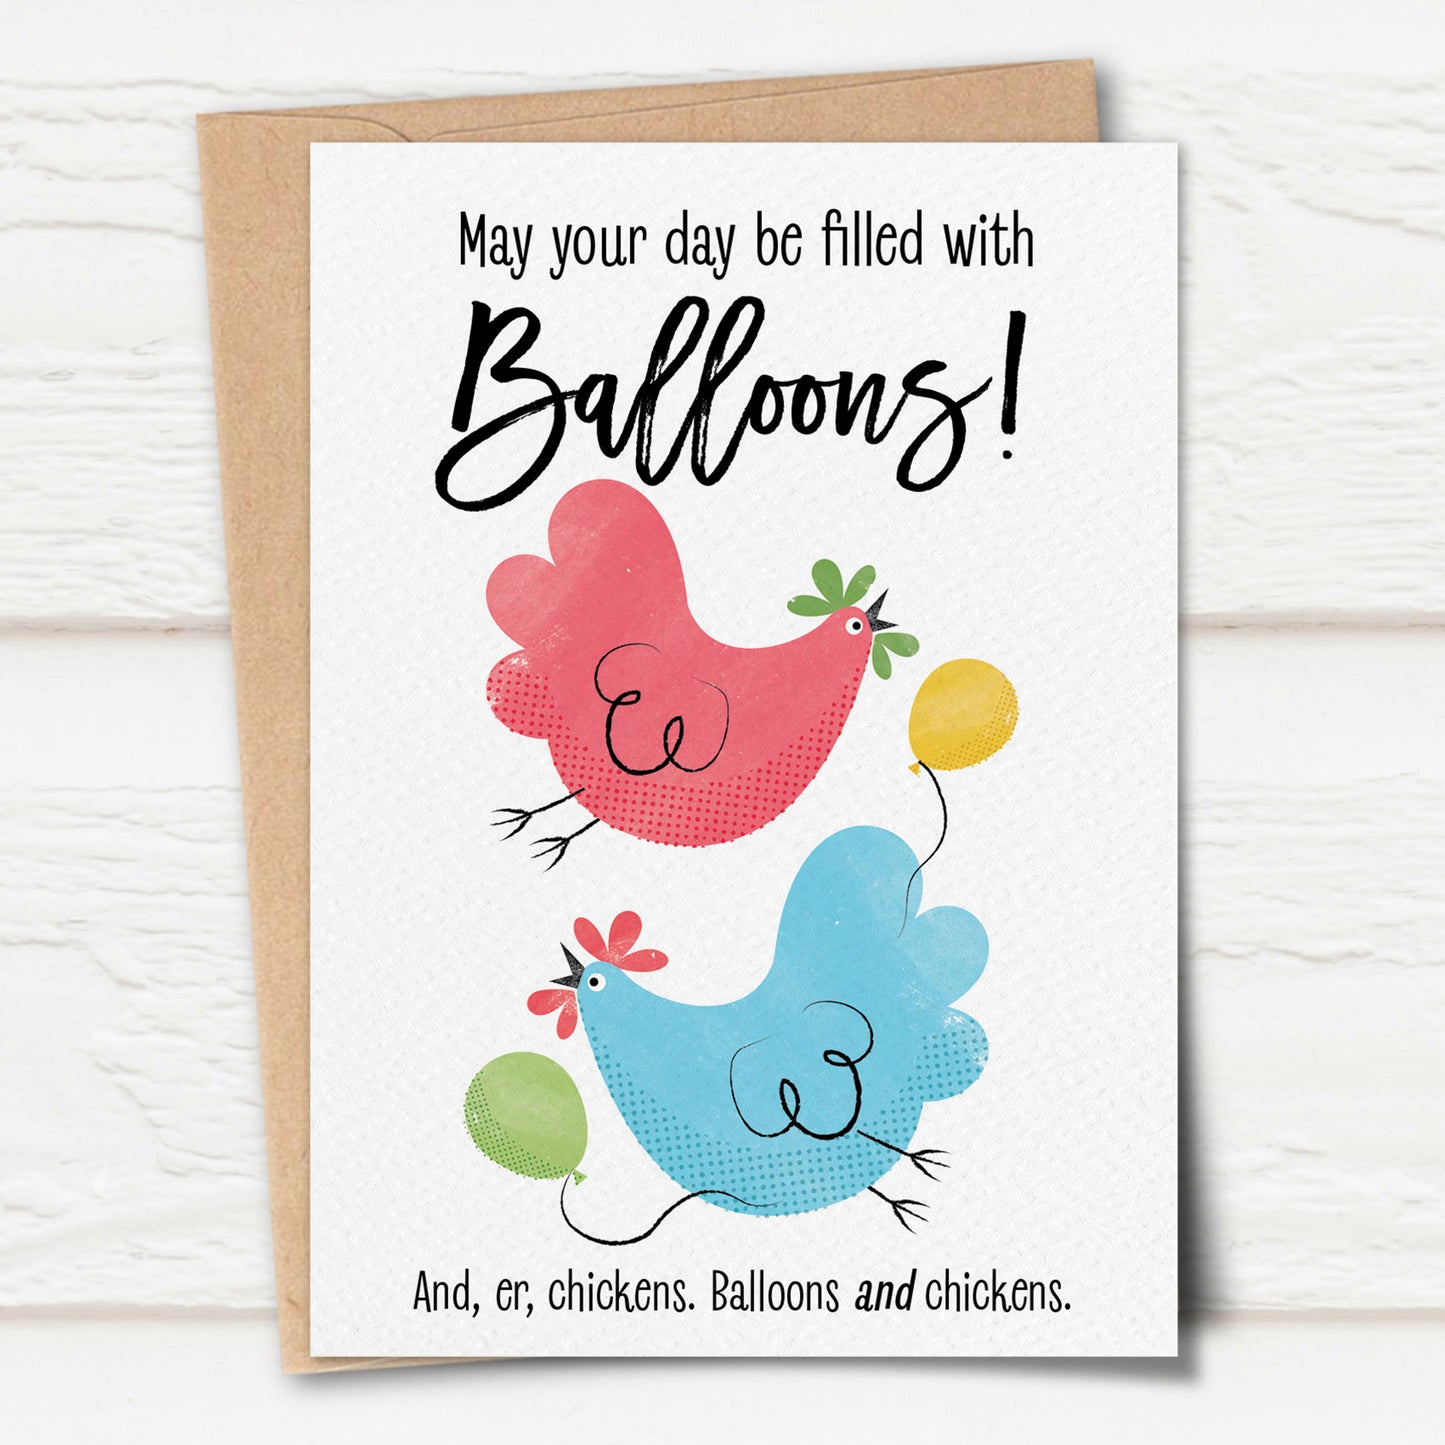 Sketchy Balloons and Chickens Birthday Card